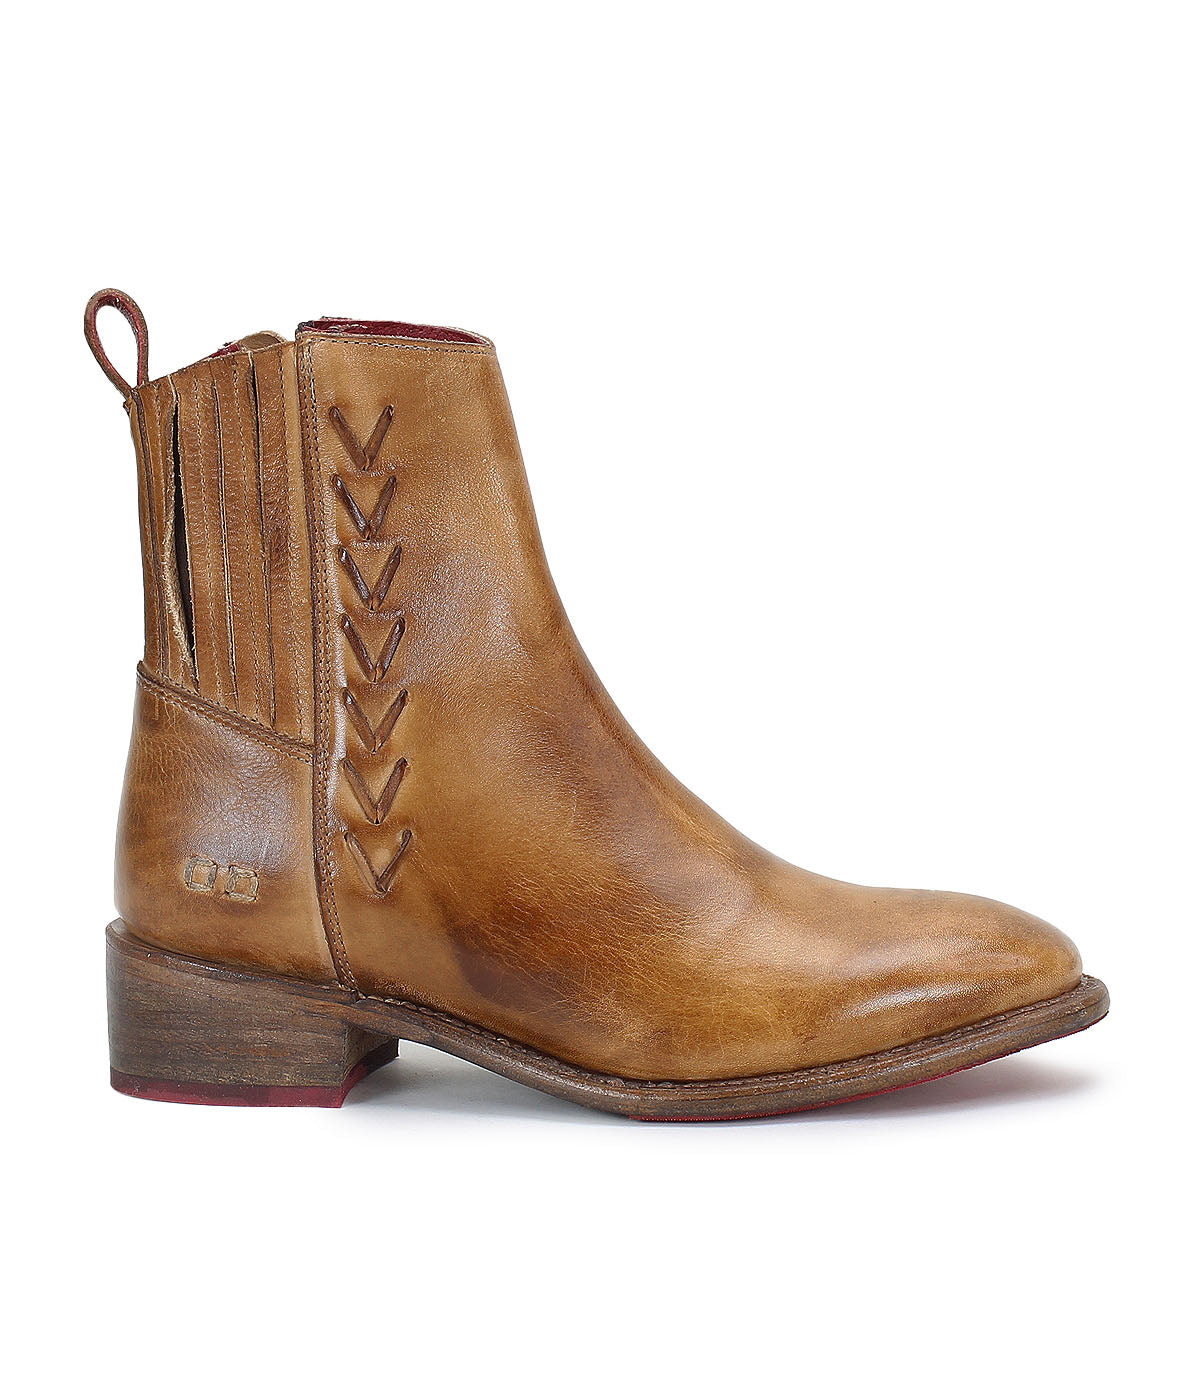 A women's tan leather Alina ankle boot by Bed Stu.